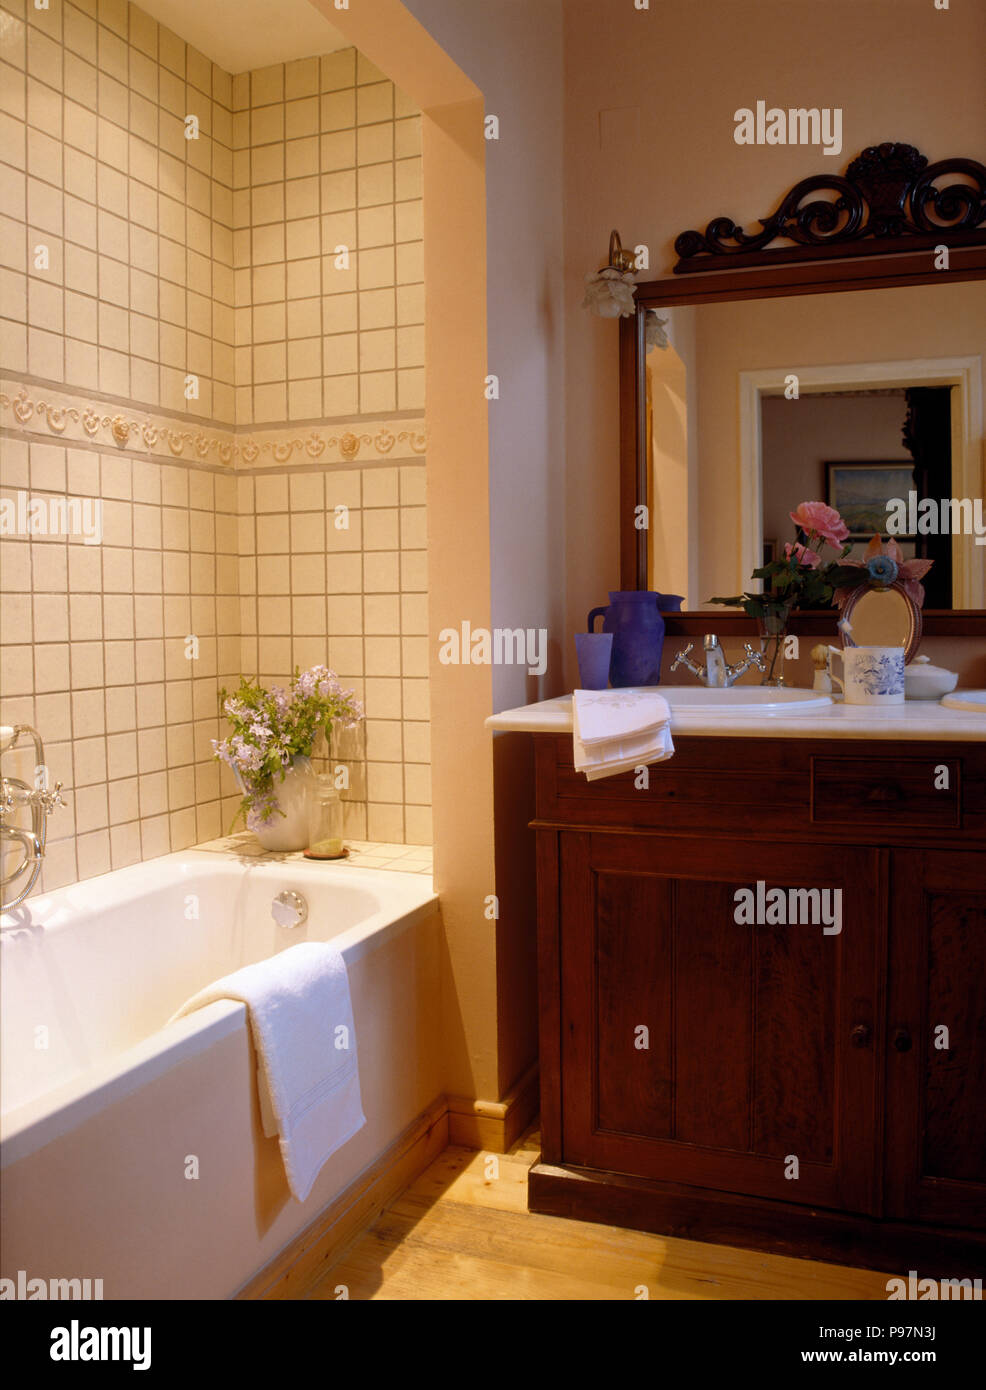 Cream tiles above recessed bath in a nineties bathroom with a mirror above fitted basin in vanity unit Stock Photo